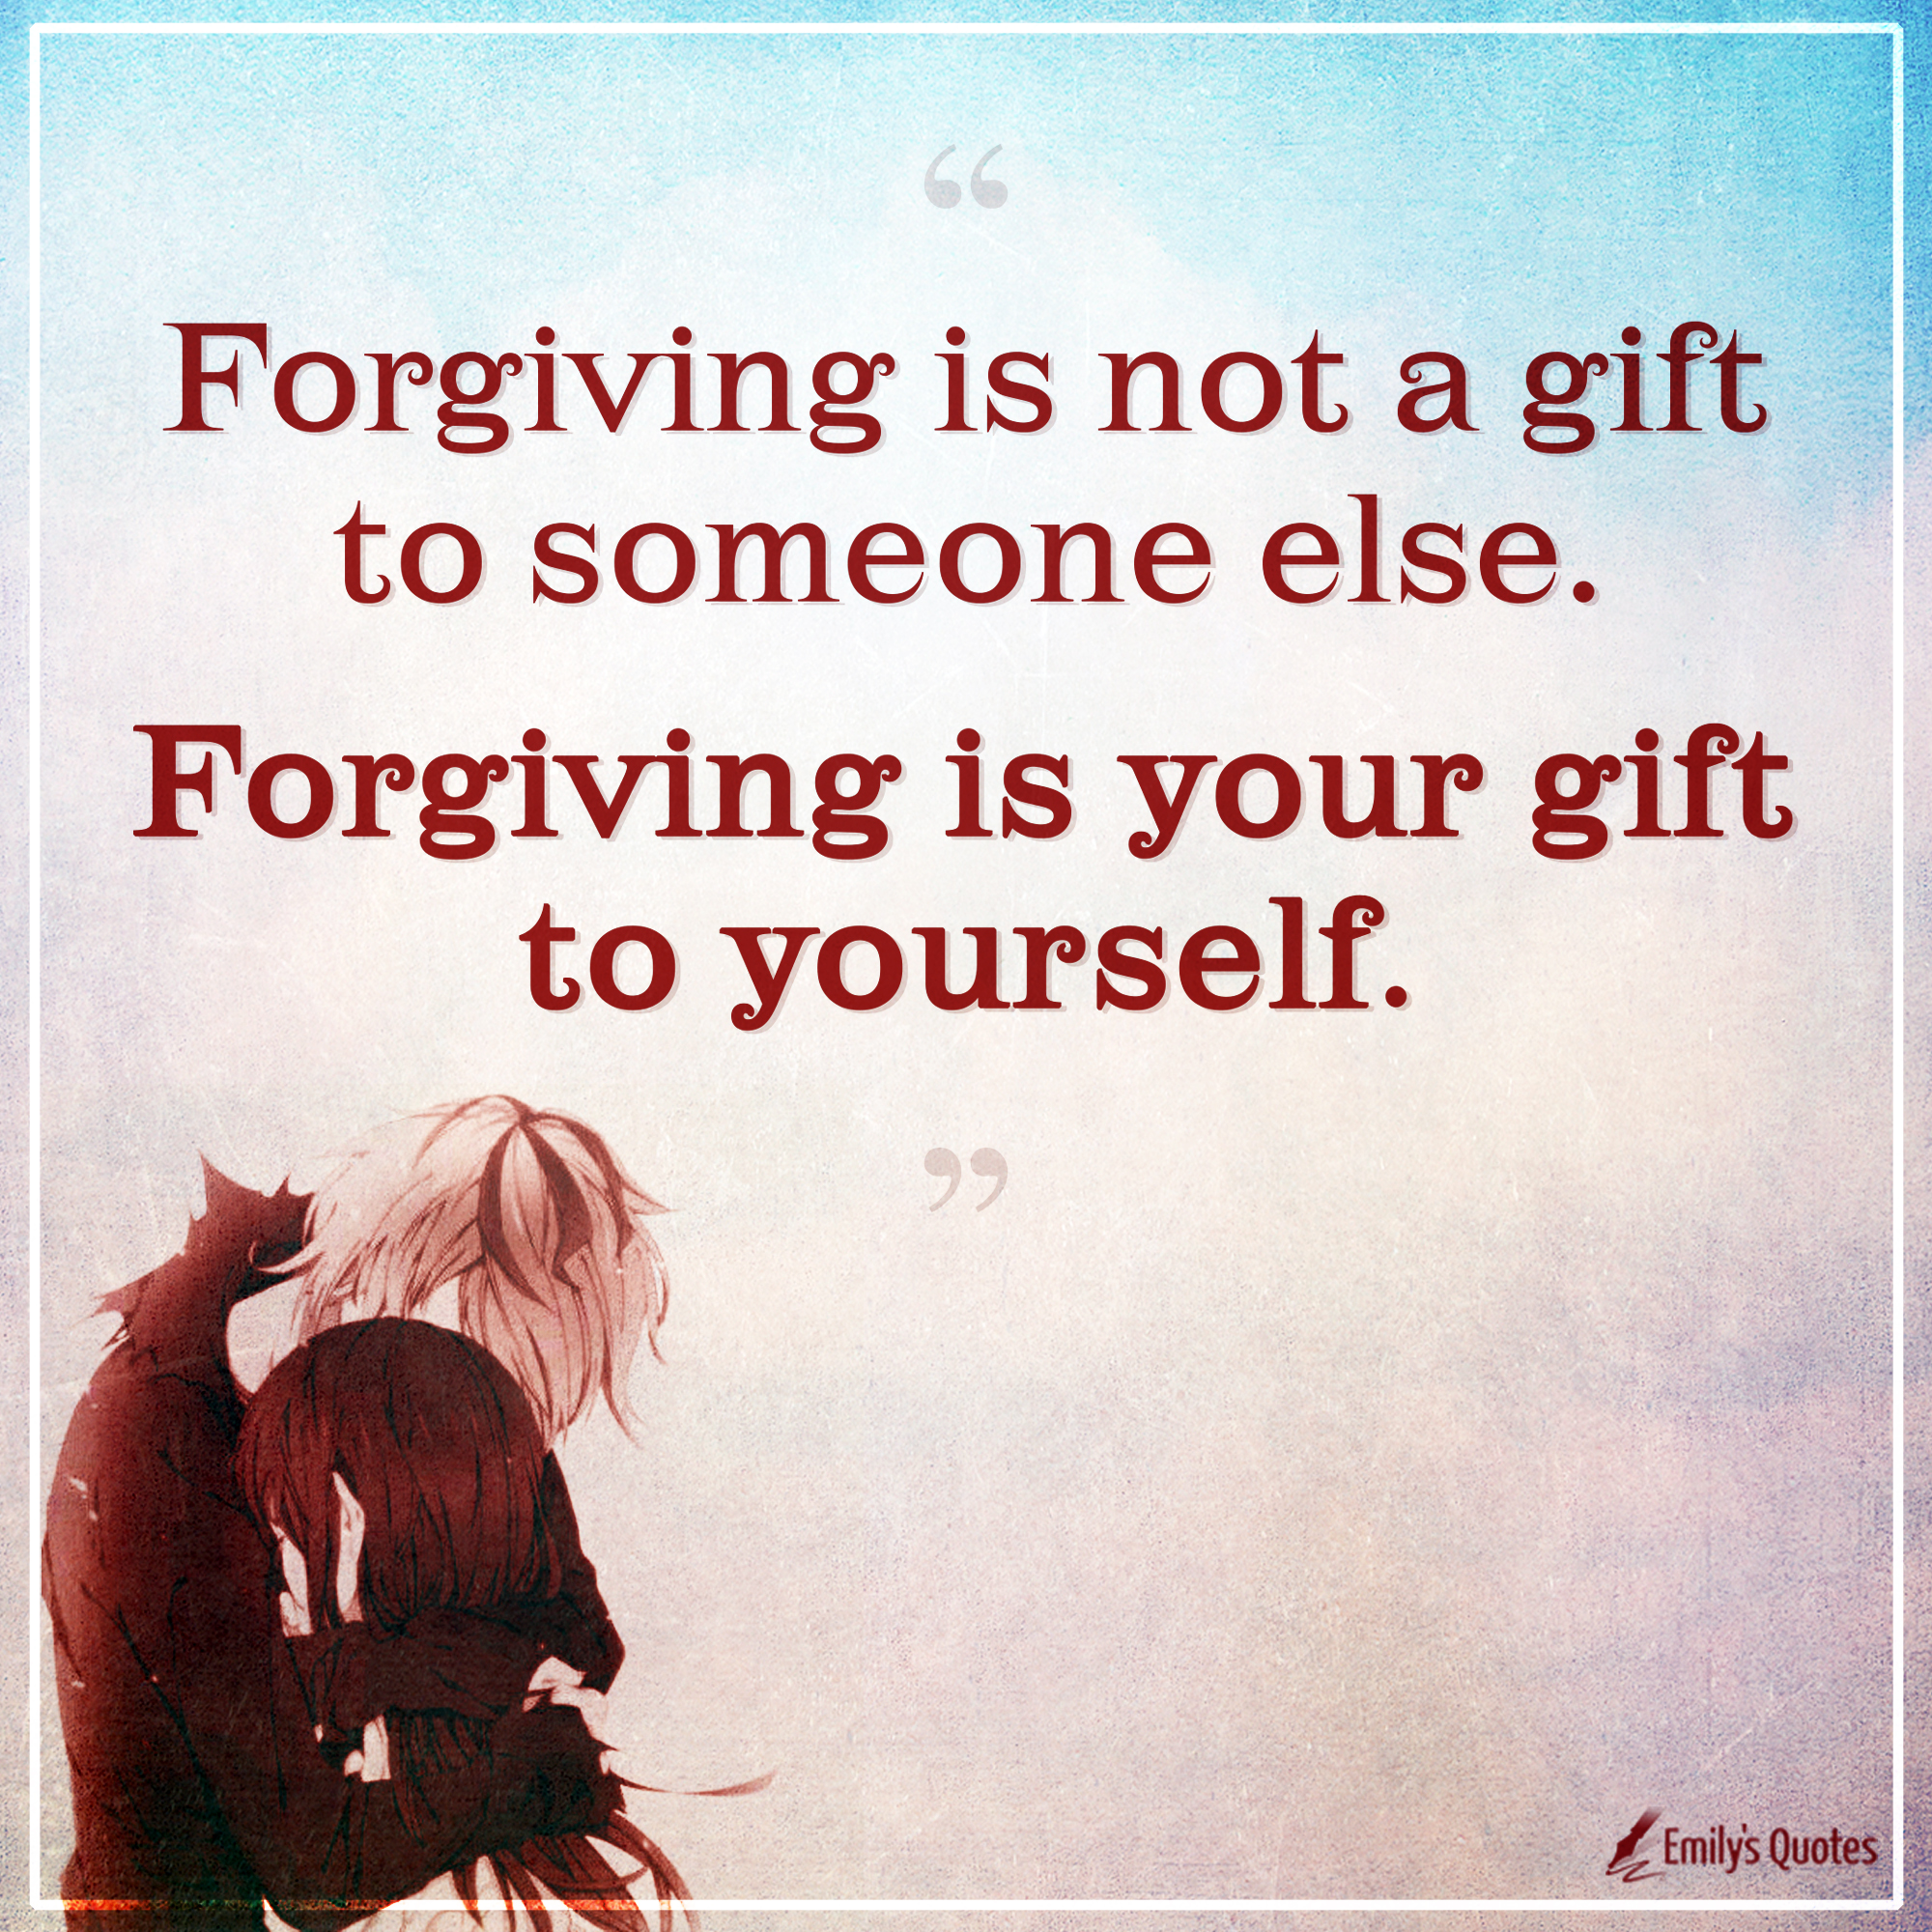 Forgiving is not a gift to someone else. Forgiving is your gift to yourself